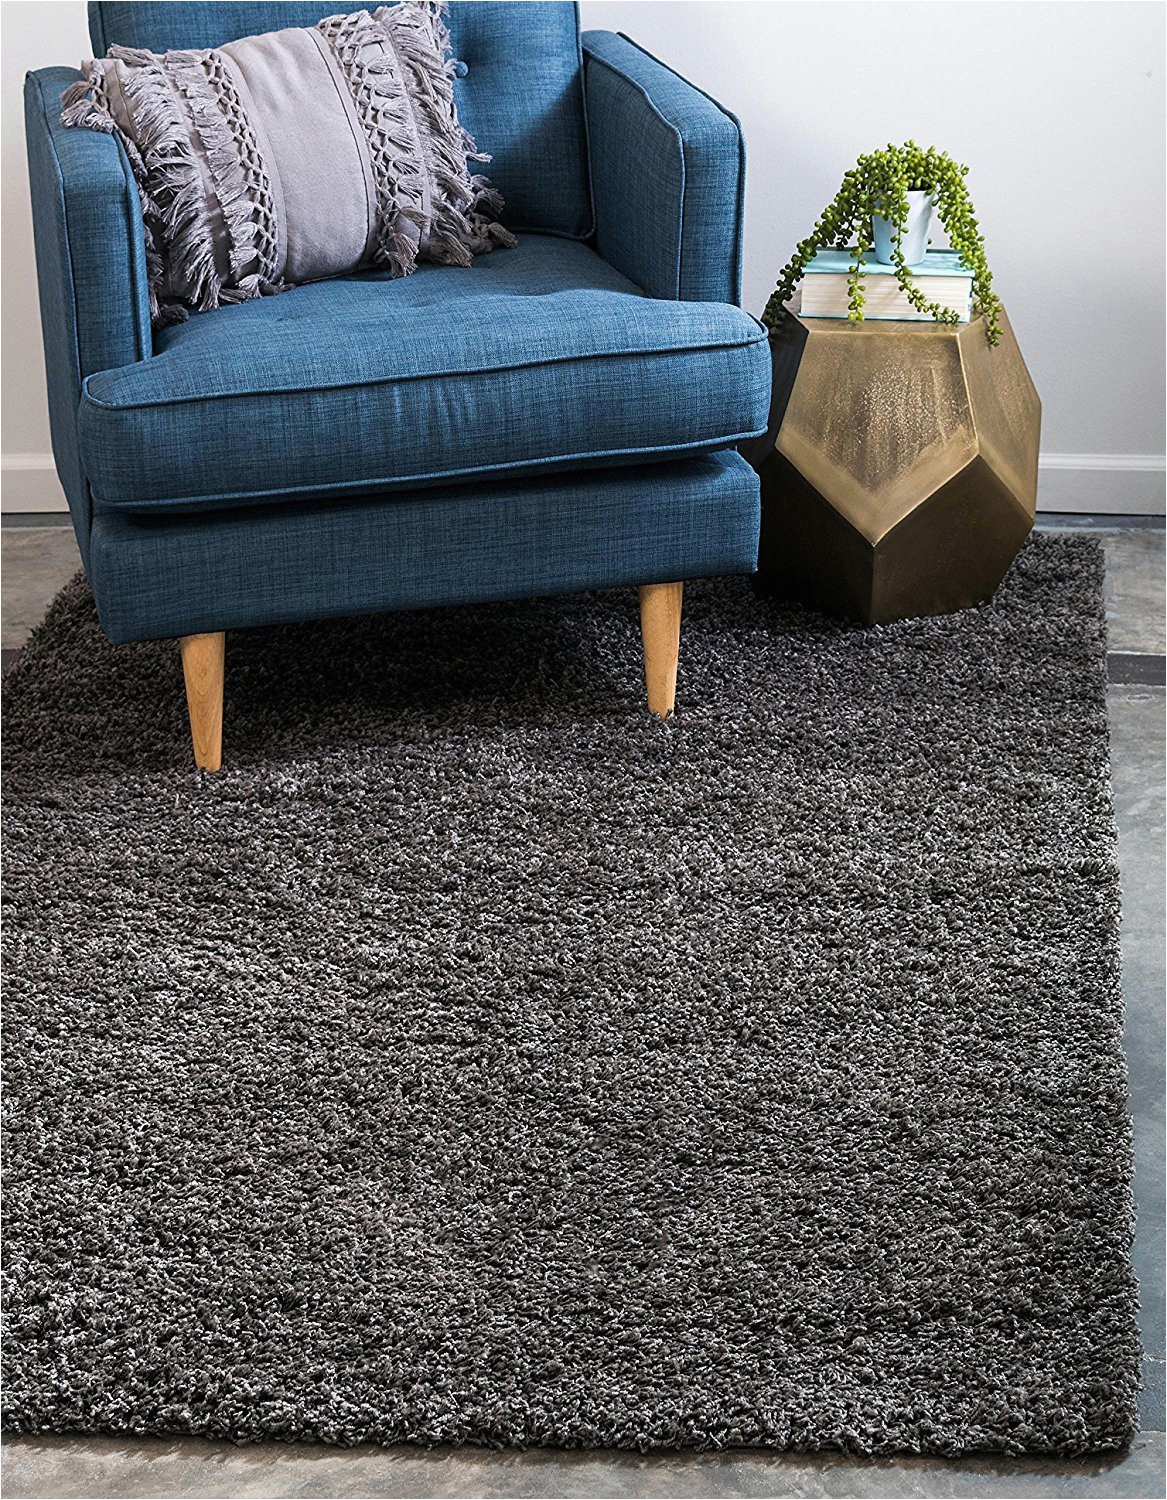 60 X 60 area Rug Bravich Rugmasters Dark Grey Small Rug 5 Cm Thick Shag Pile soft Shaggy area Rugs Modern Carpet Living Room Bedroom Mats 60 X 110 Cm 2 X 3 7